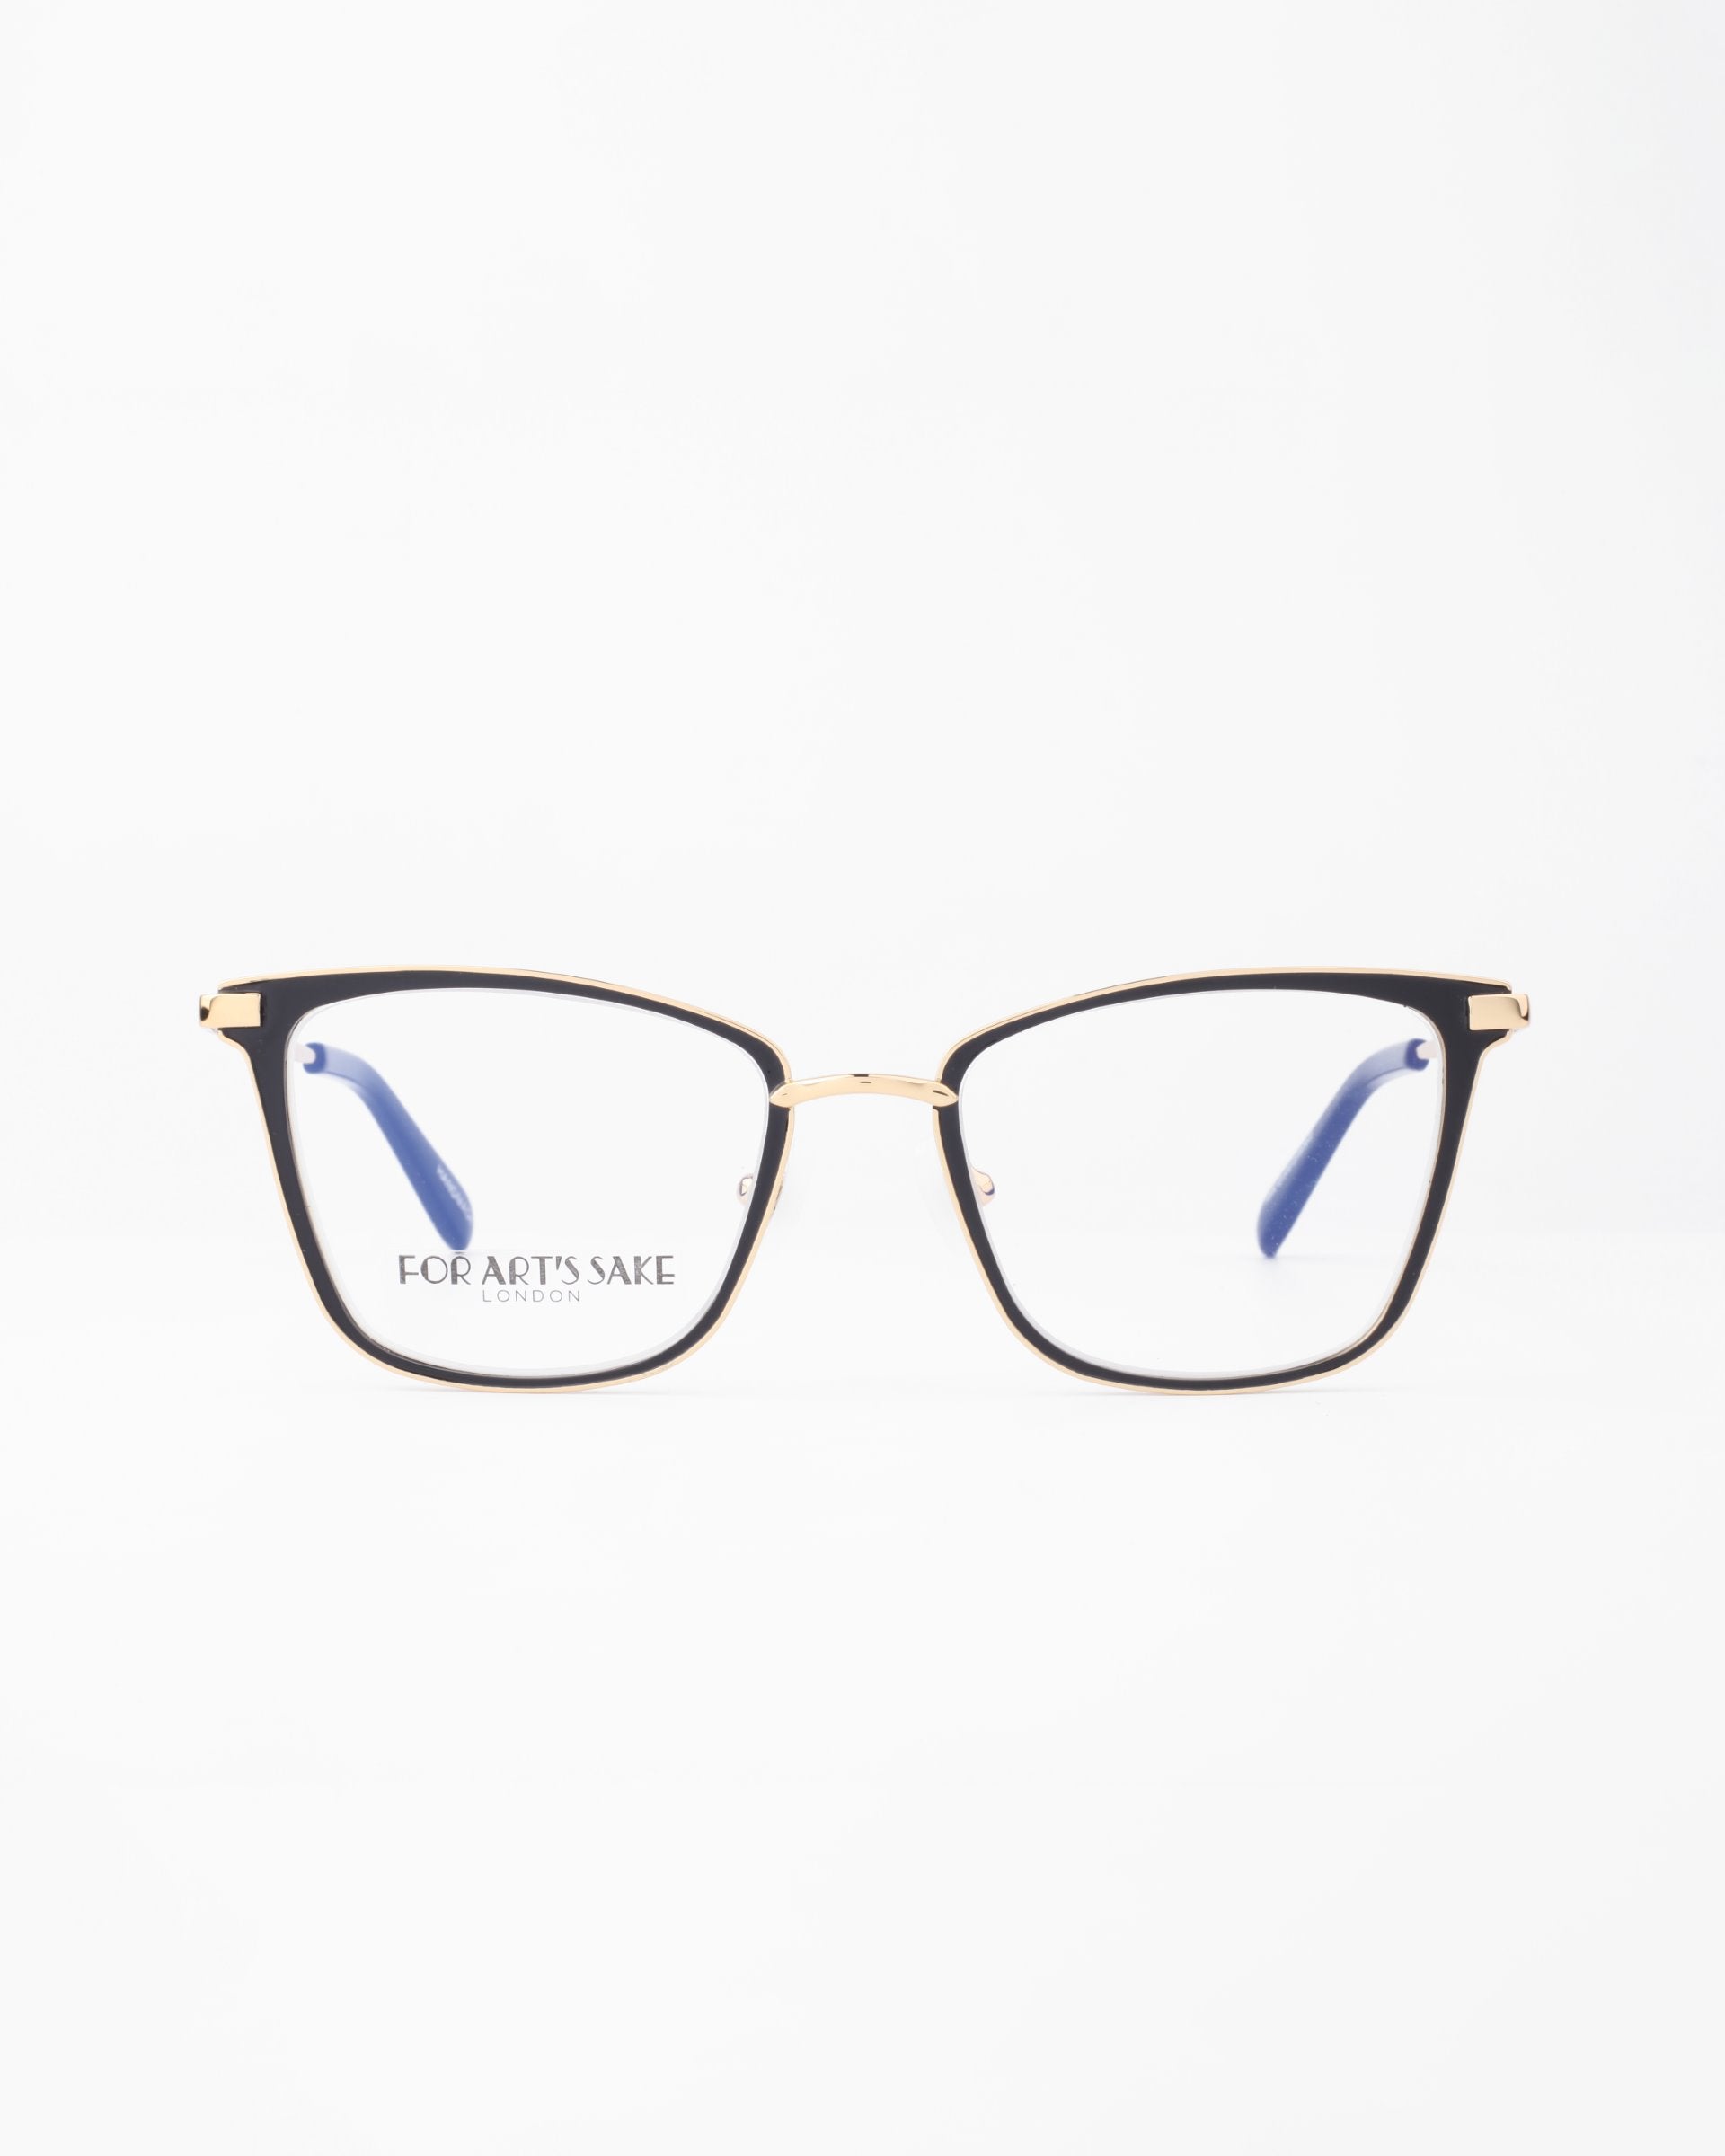 A pair of eyeglasses with thin 18-karat gold-plated frames and black accents on the upper rims are displayed against a white background. The temples&#39; tips are blue, and the brand name &quot;For Art&#39;s Sake®&quot; is visible on the left lens. These stylish Windsor frames also feature a blue light filter for added eye protection.